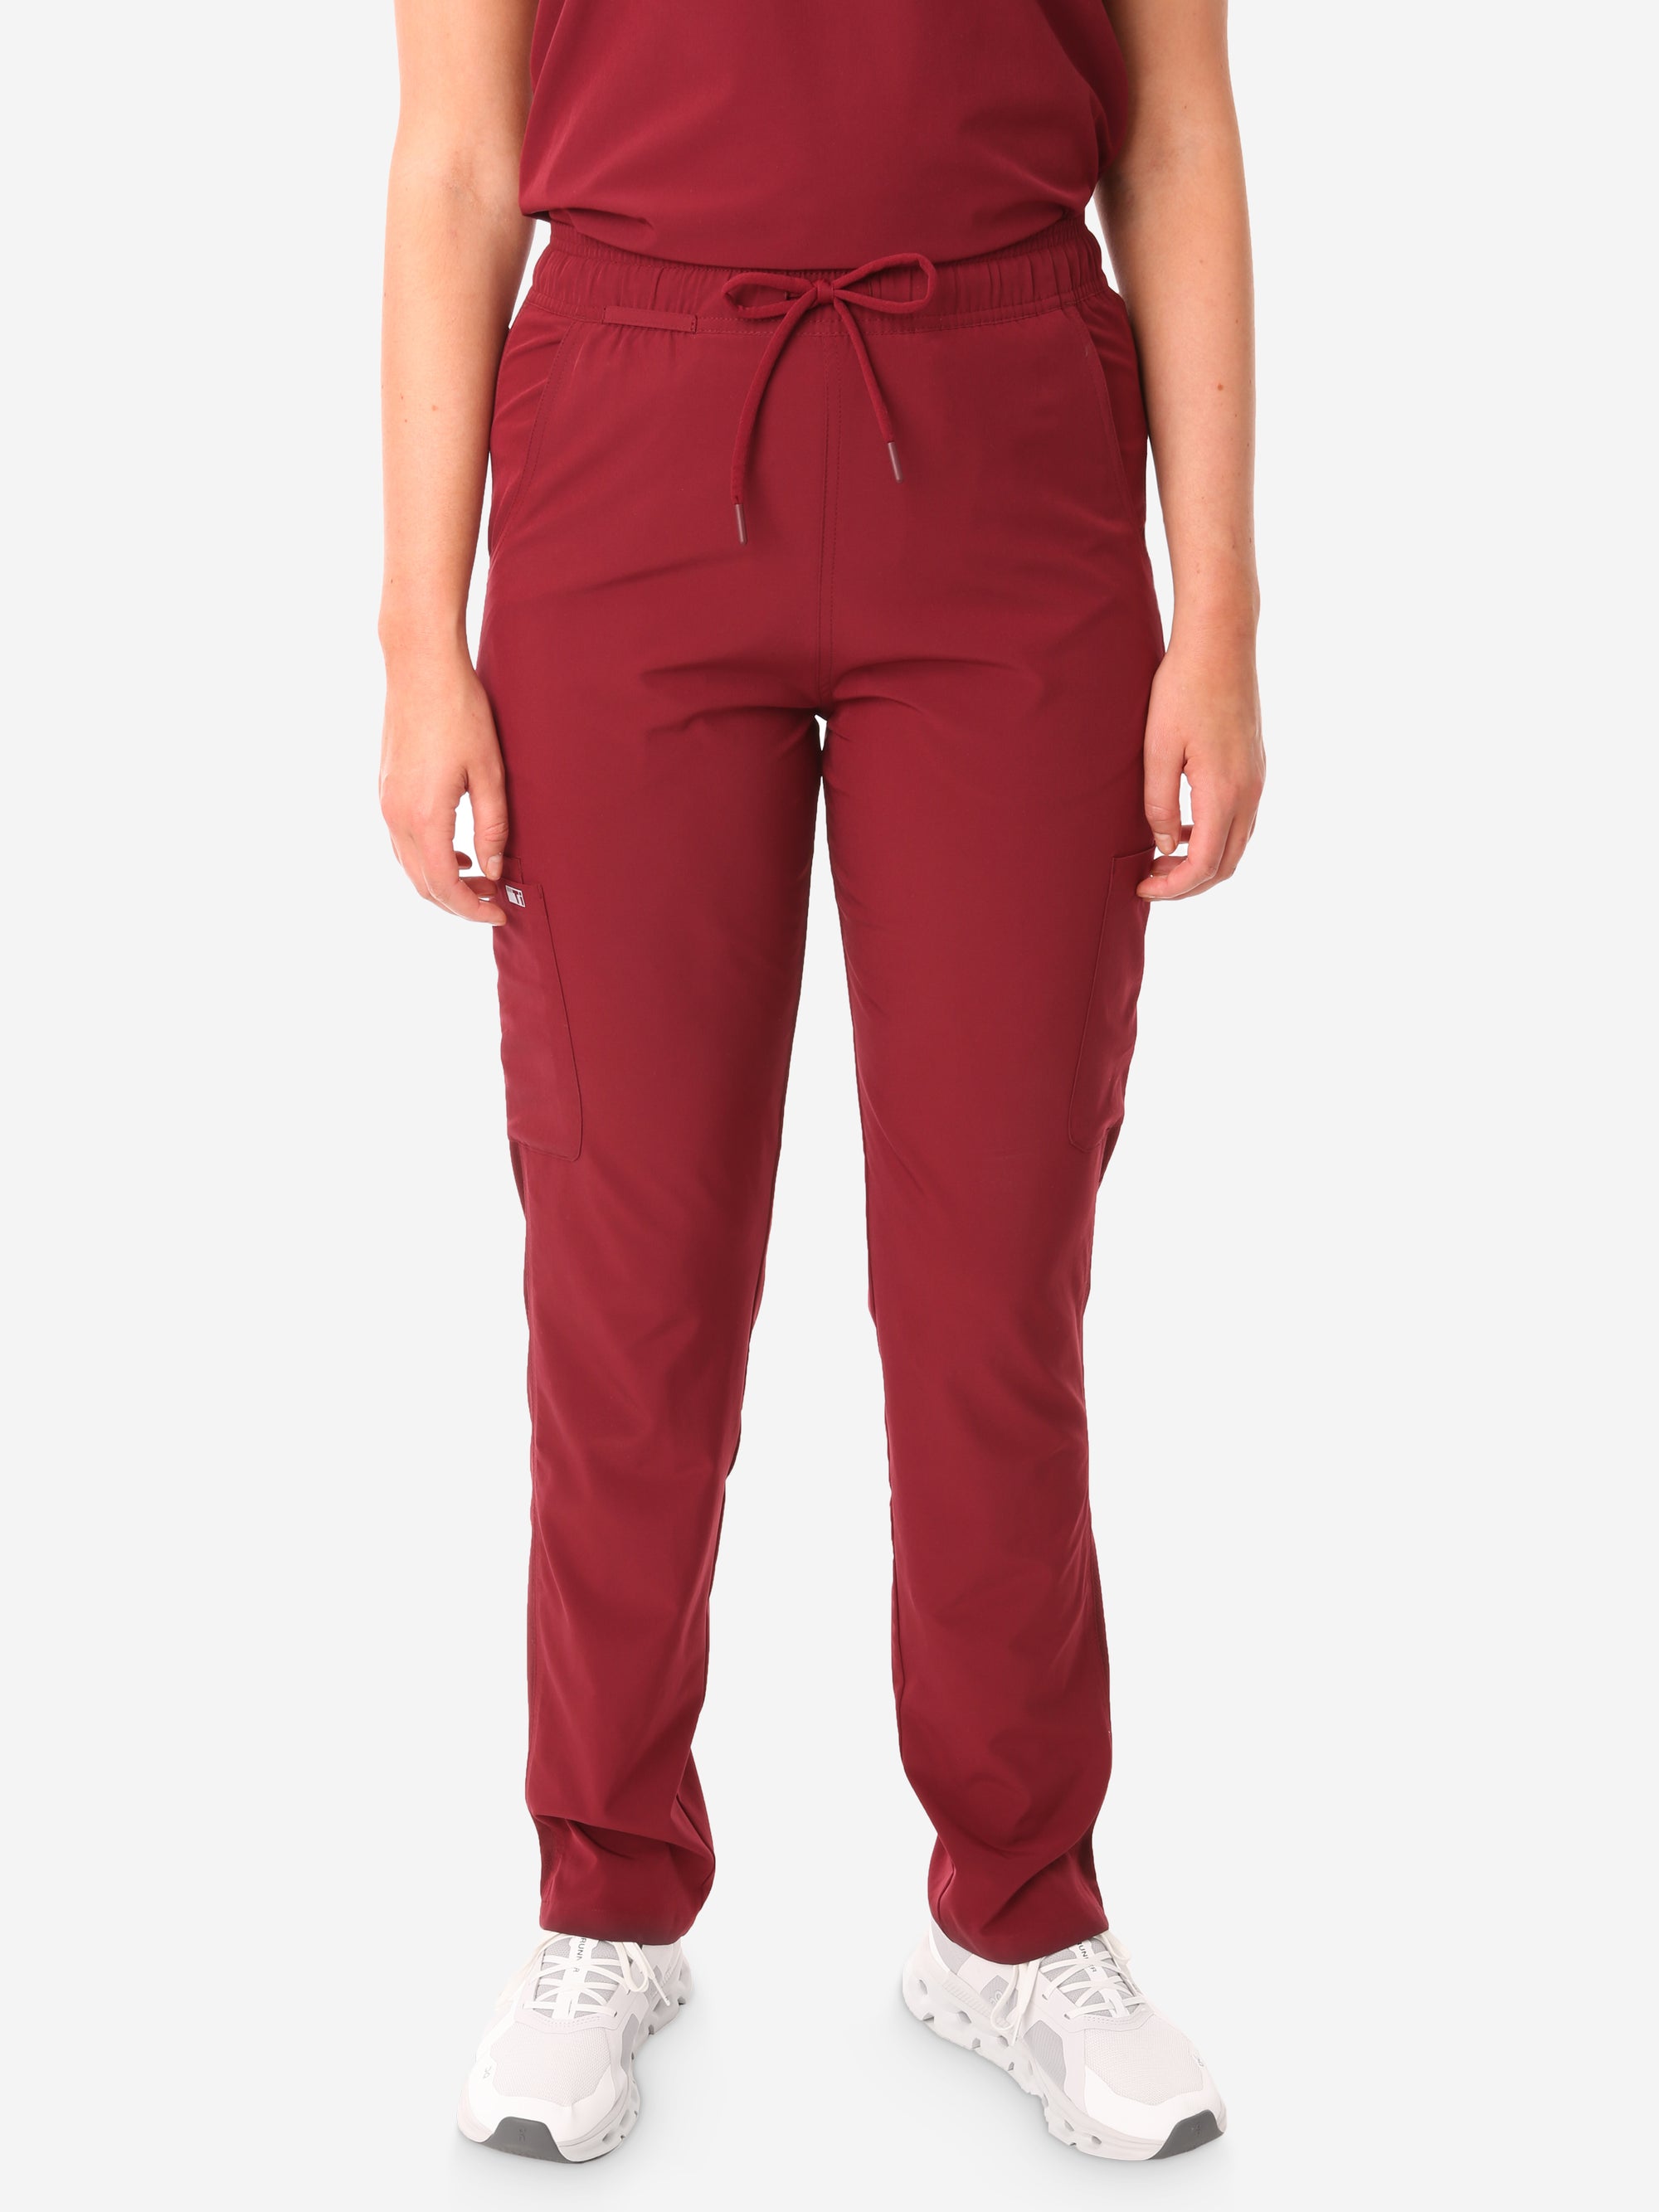 TiScrubs Bold Burgundy Women&#39;s Stretch 9-Pocket Pants Front View Pants Only